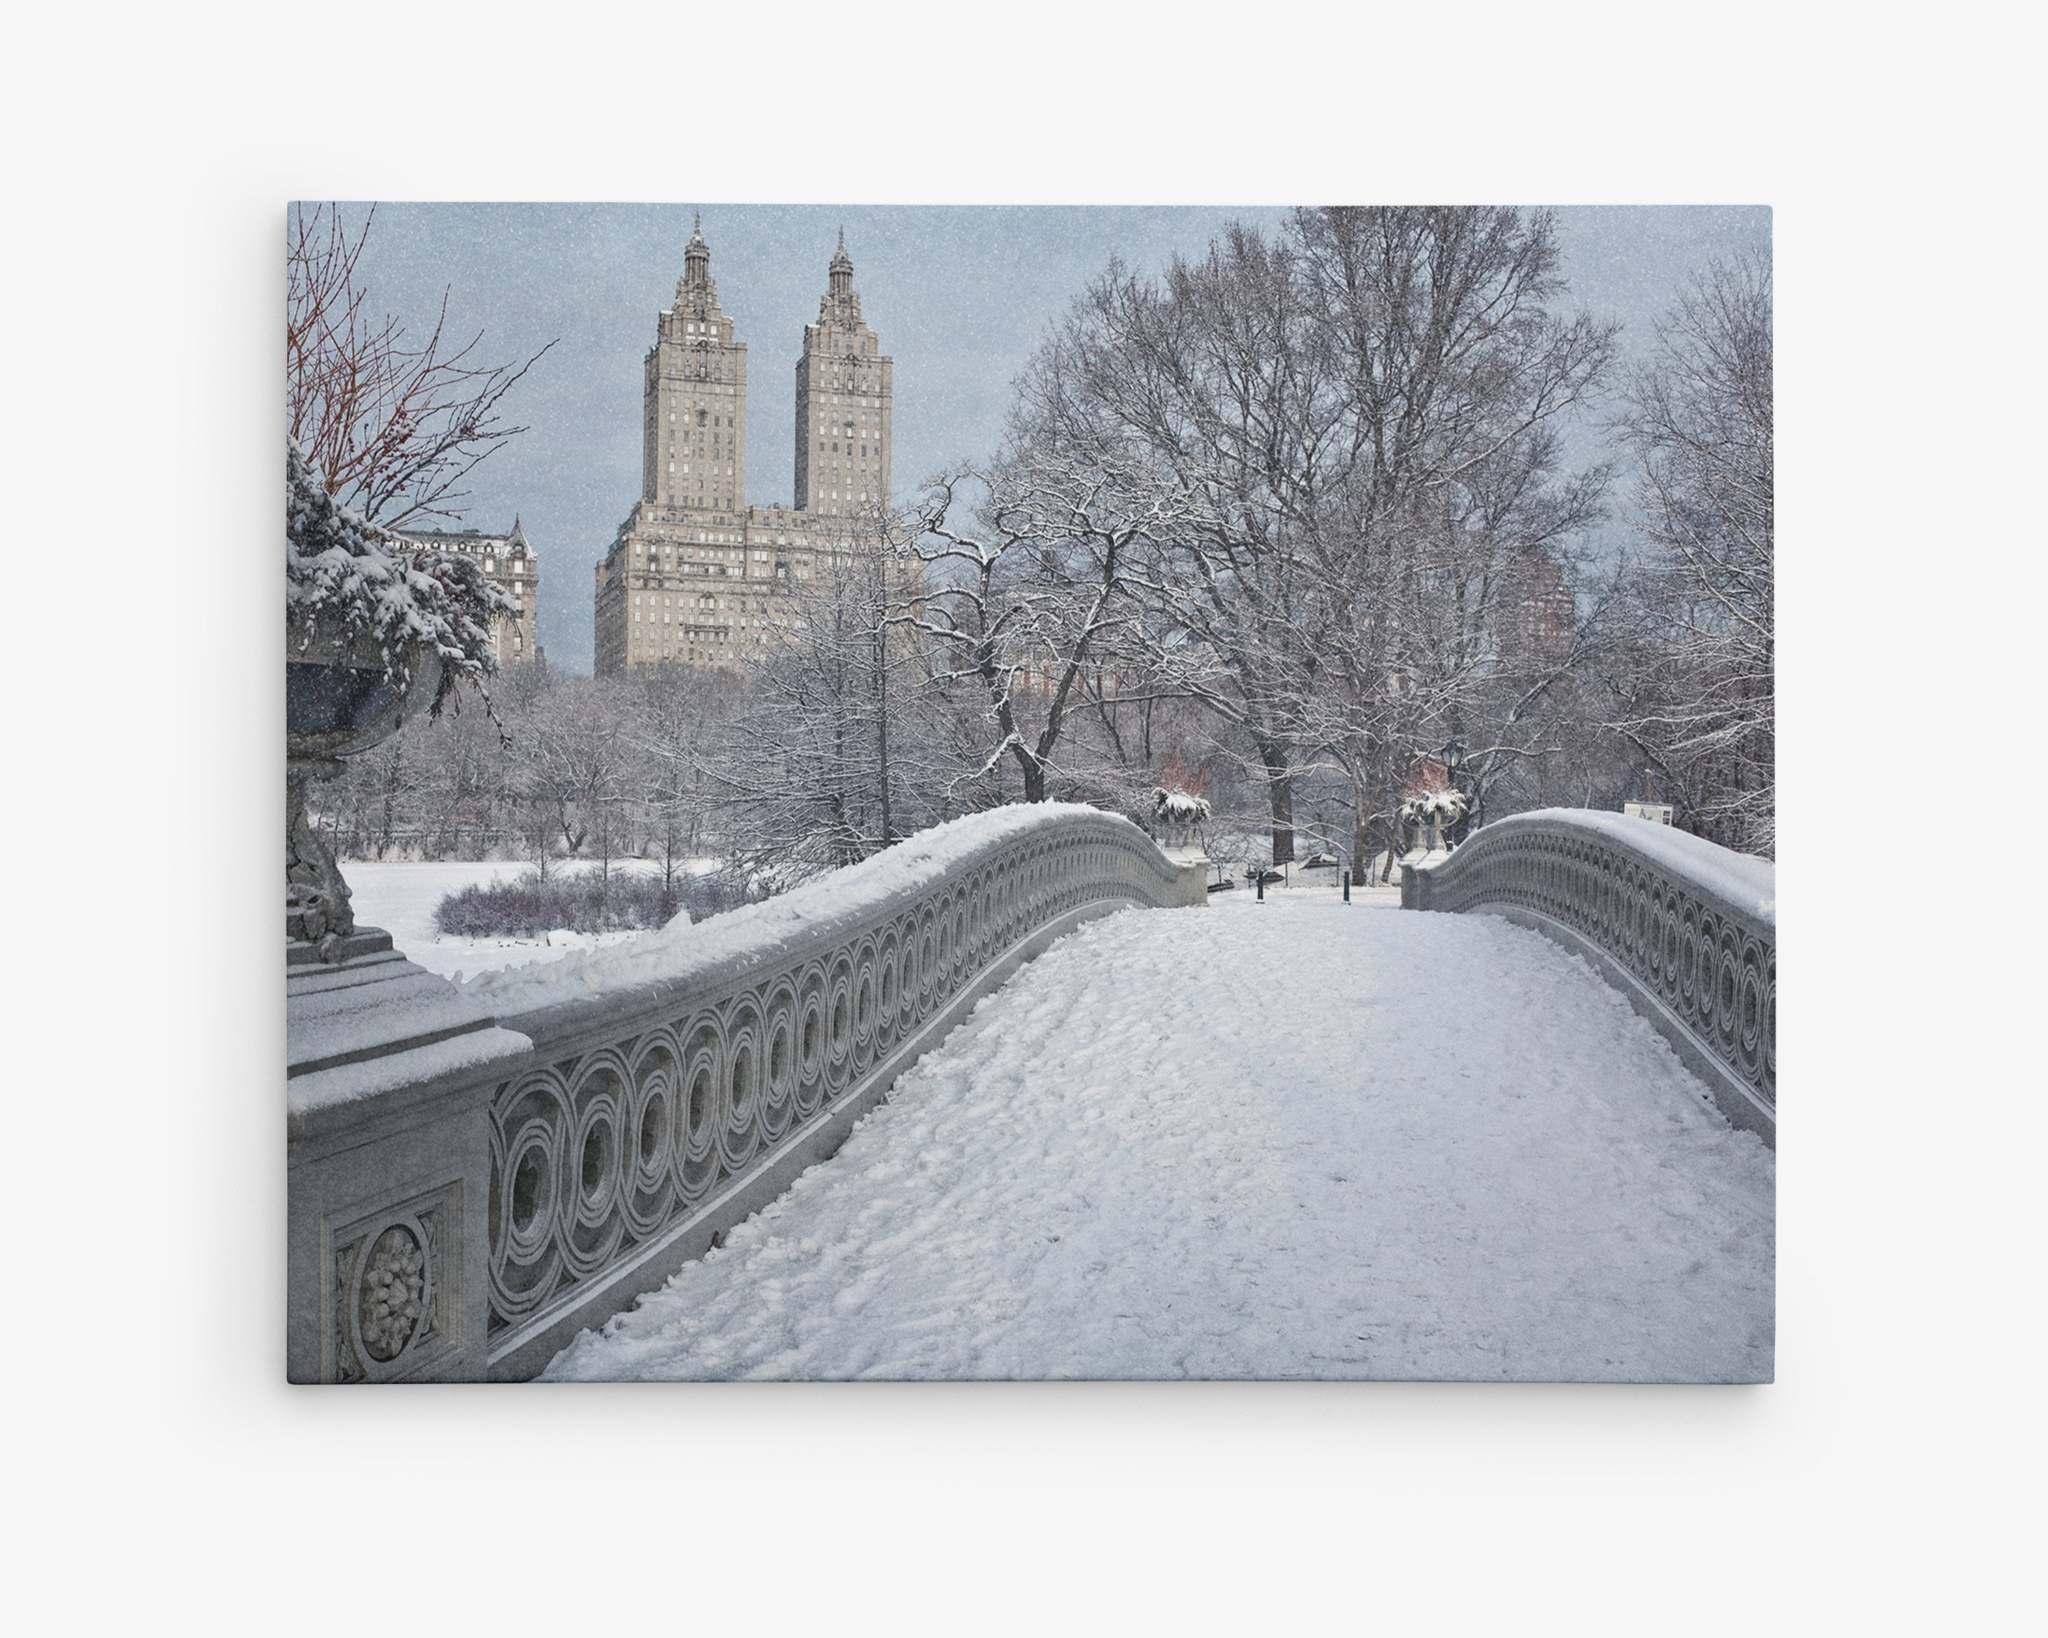 A snow-covered Bow Bridge leads into Central Park in New York City during winter. The trees are dusted with snow, and two iconic tall buildings are visible in the background, standing against a gray sky. The scene is quiet, serene, and picturesque—perfect for the Offley Green New York City Canvas Wall Art, &#39;Snow on Bow Bridge&#39;.